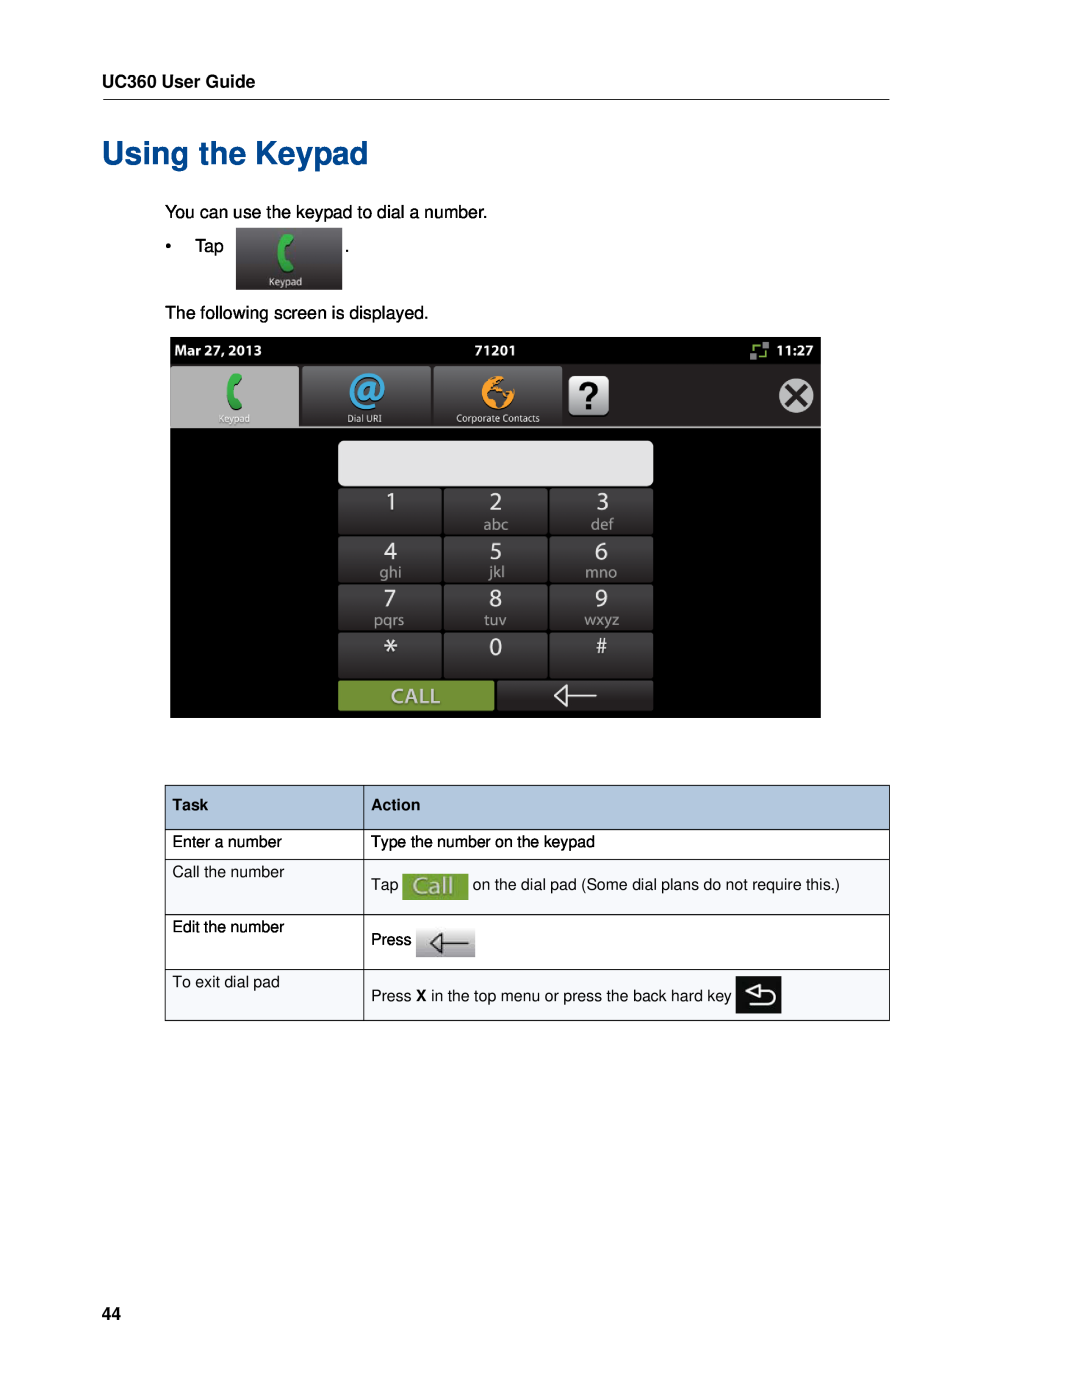 Mitel UC360 Using the Keypad, You can use the keypad to dial a number, The following screen is displayed, Task, Action 